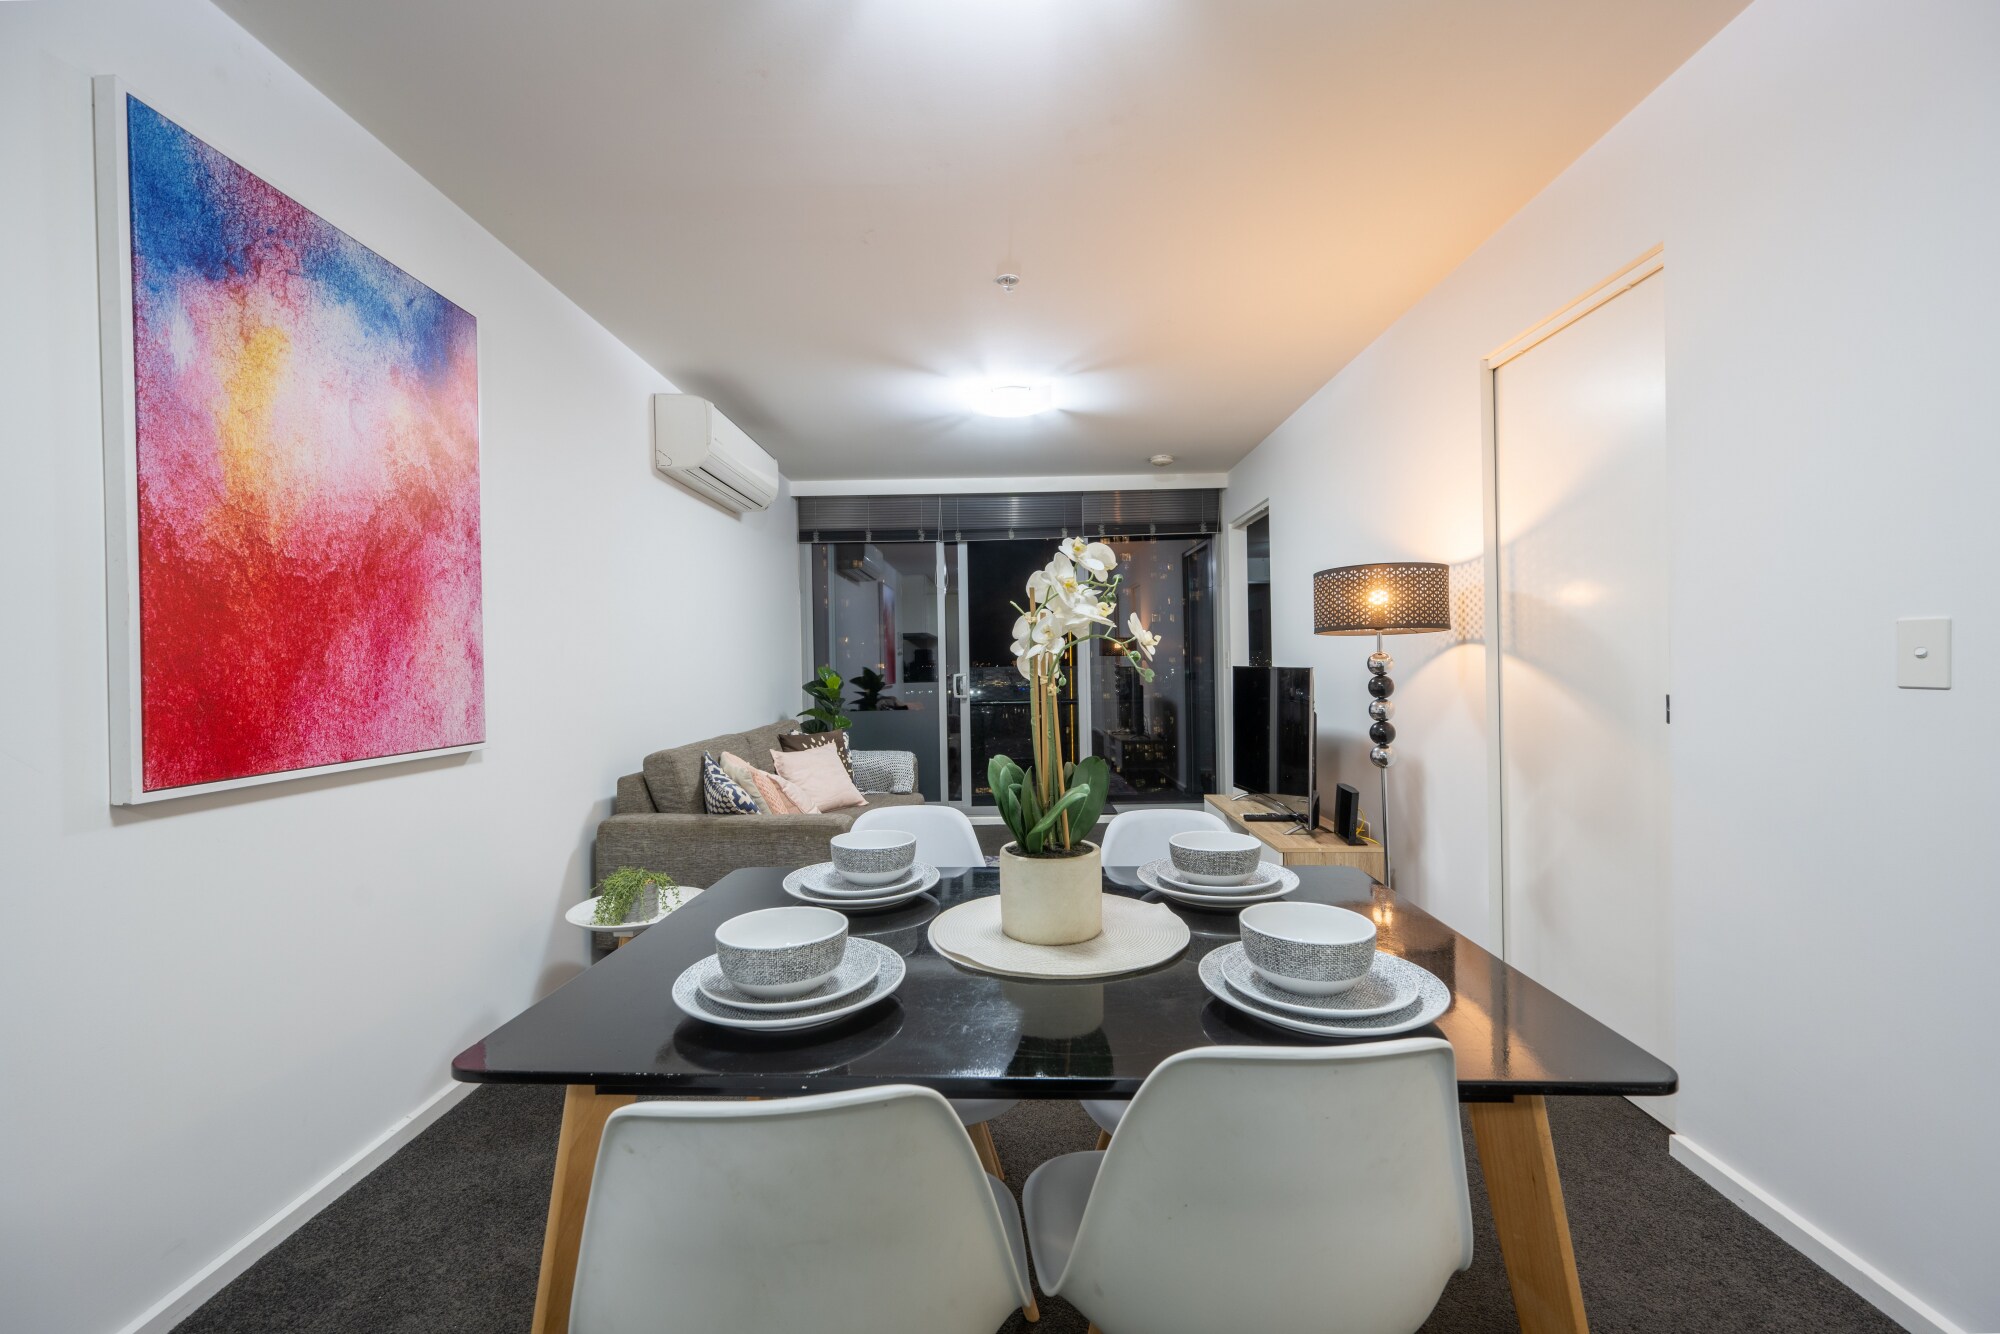 Wine and dine within the apartment with a stylish table set for four